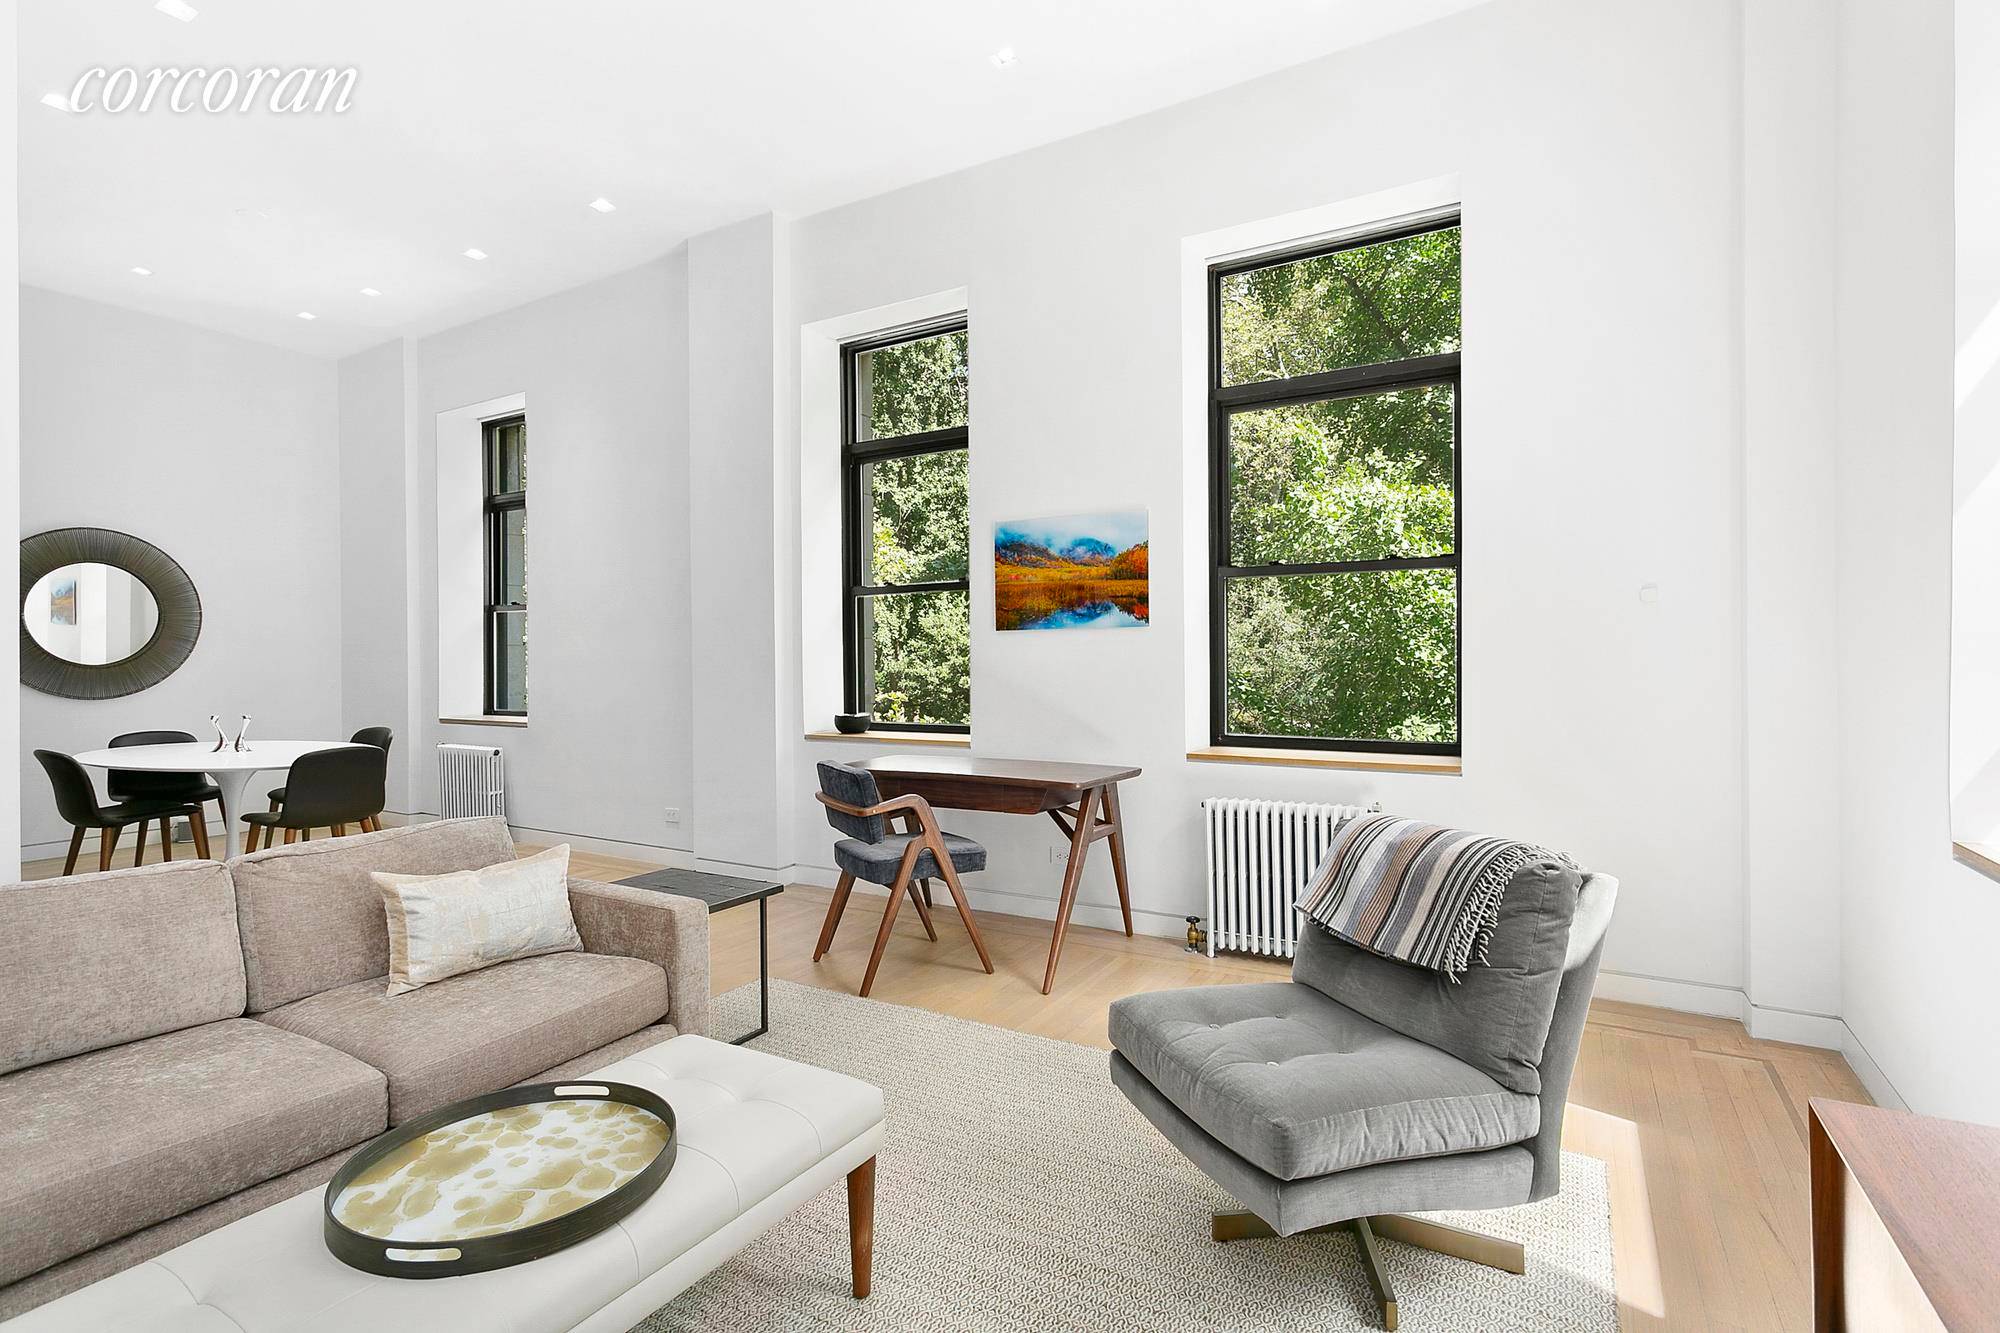 Be wowed by the full Gramercy Park views and the luxury renovations at 7 Gramercy Park West 2C.